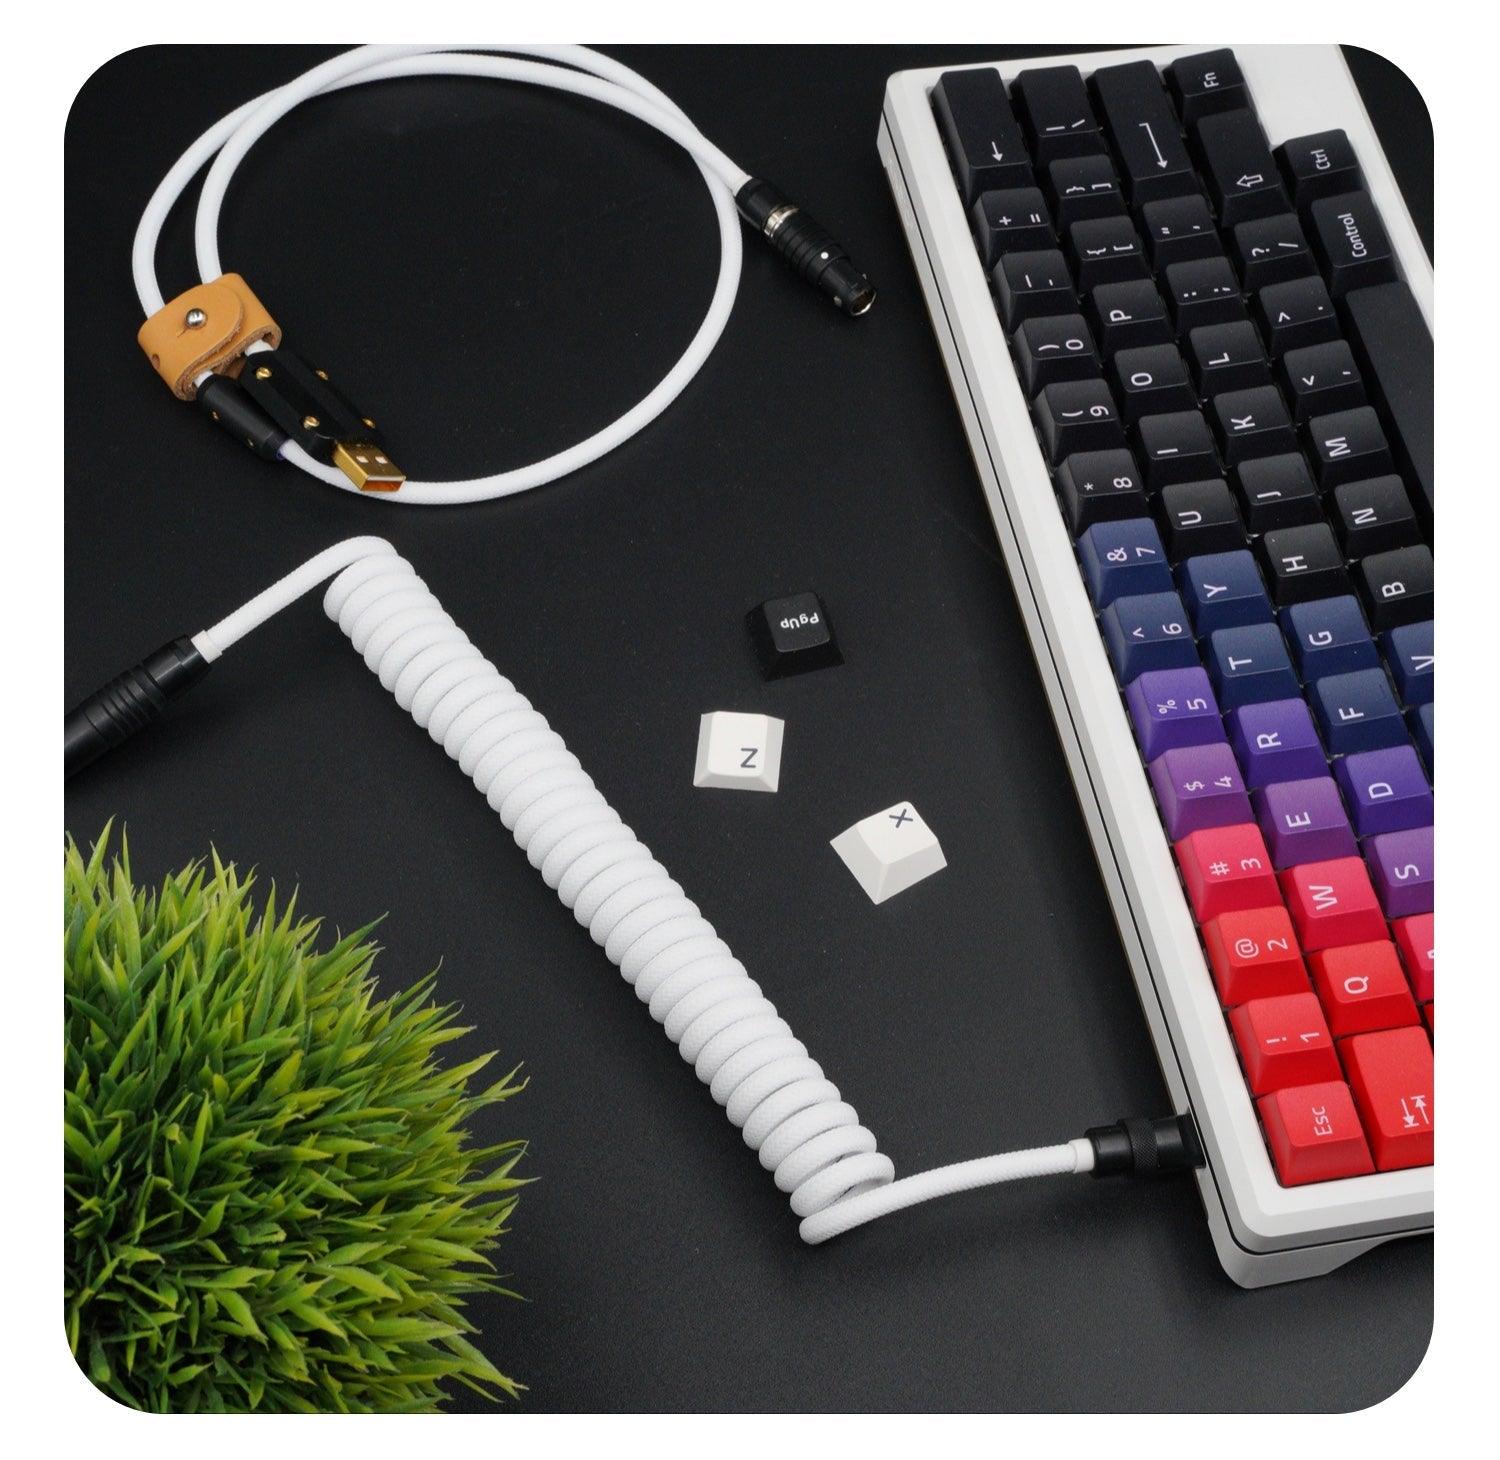 GeekCable White Handmade Customized Keyboard Cable